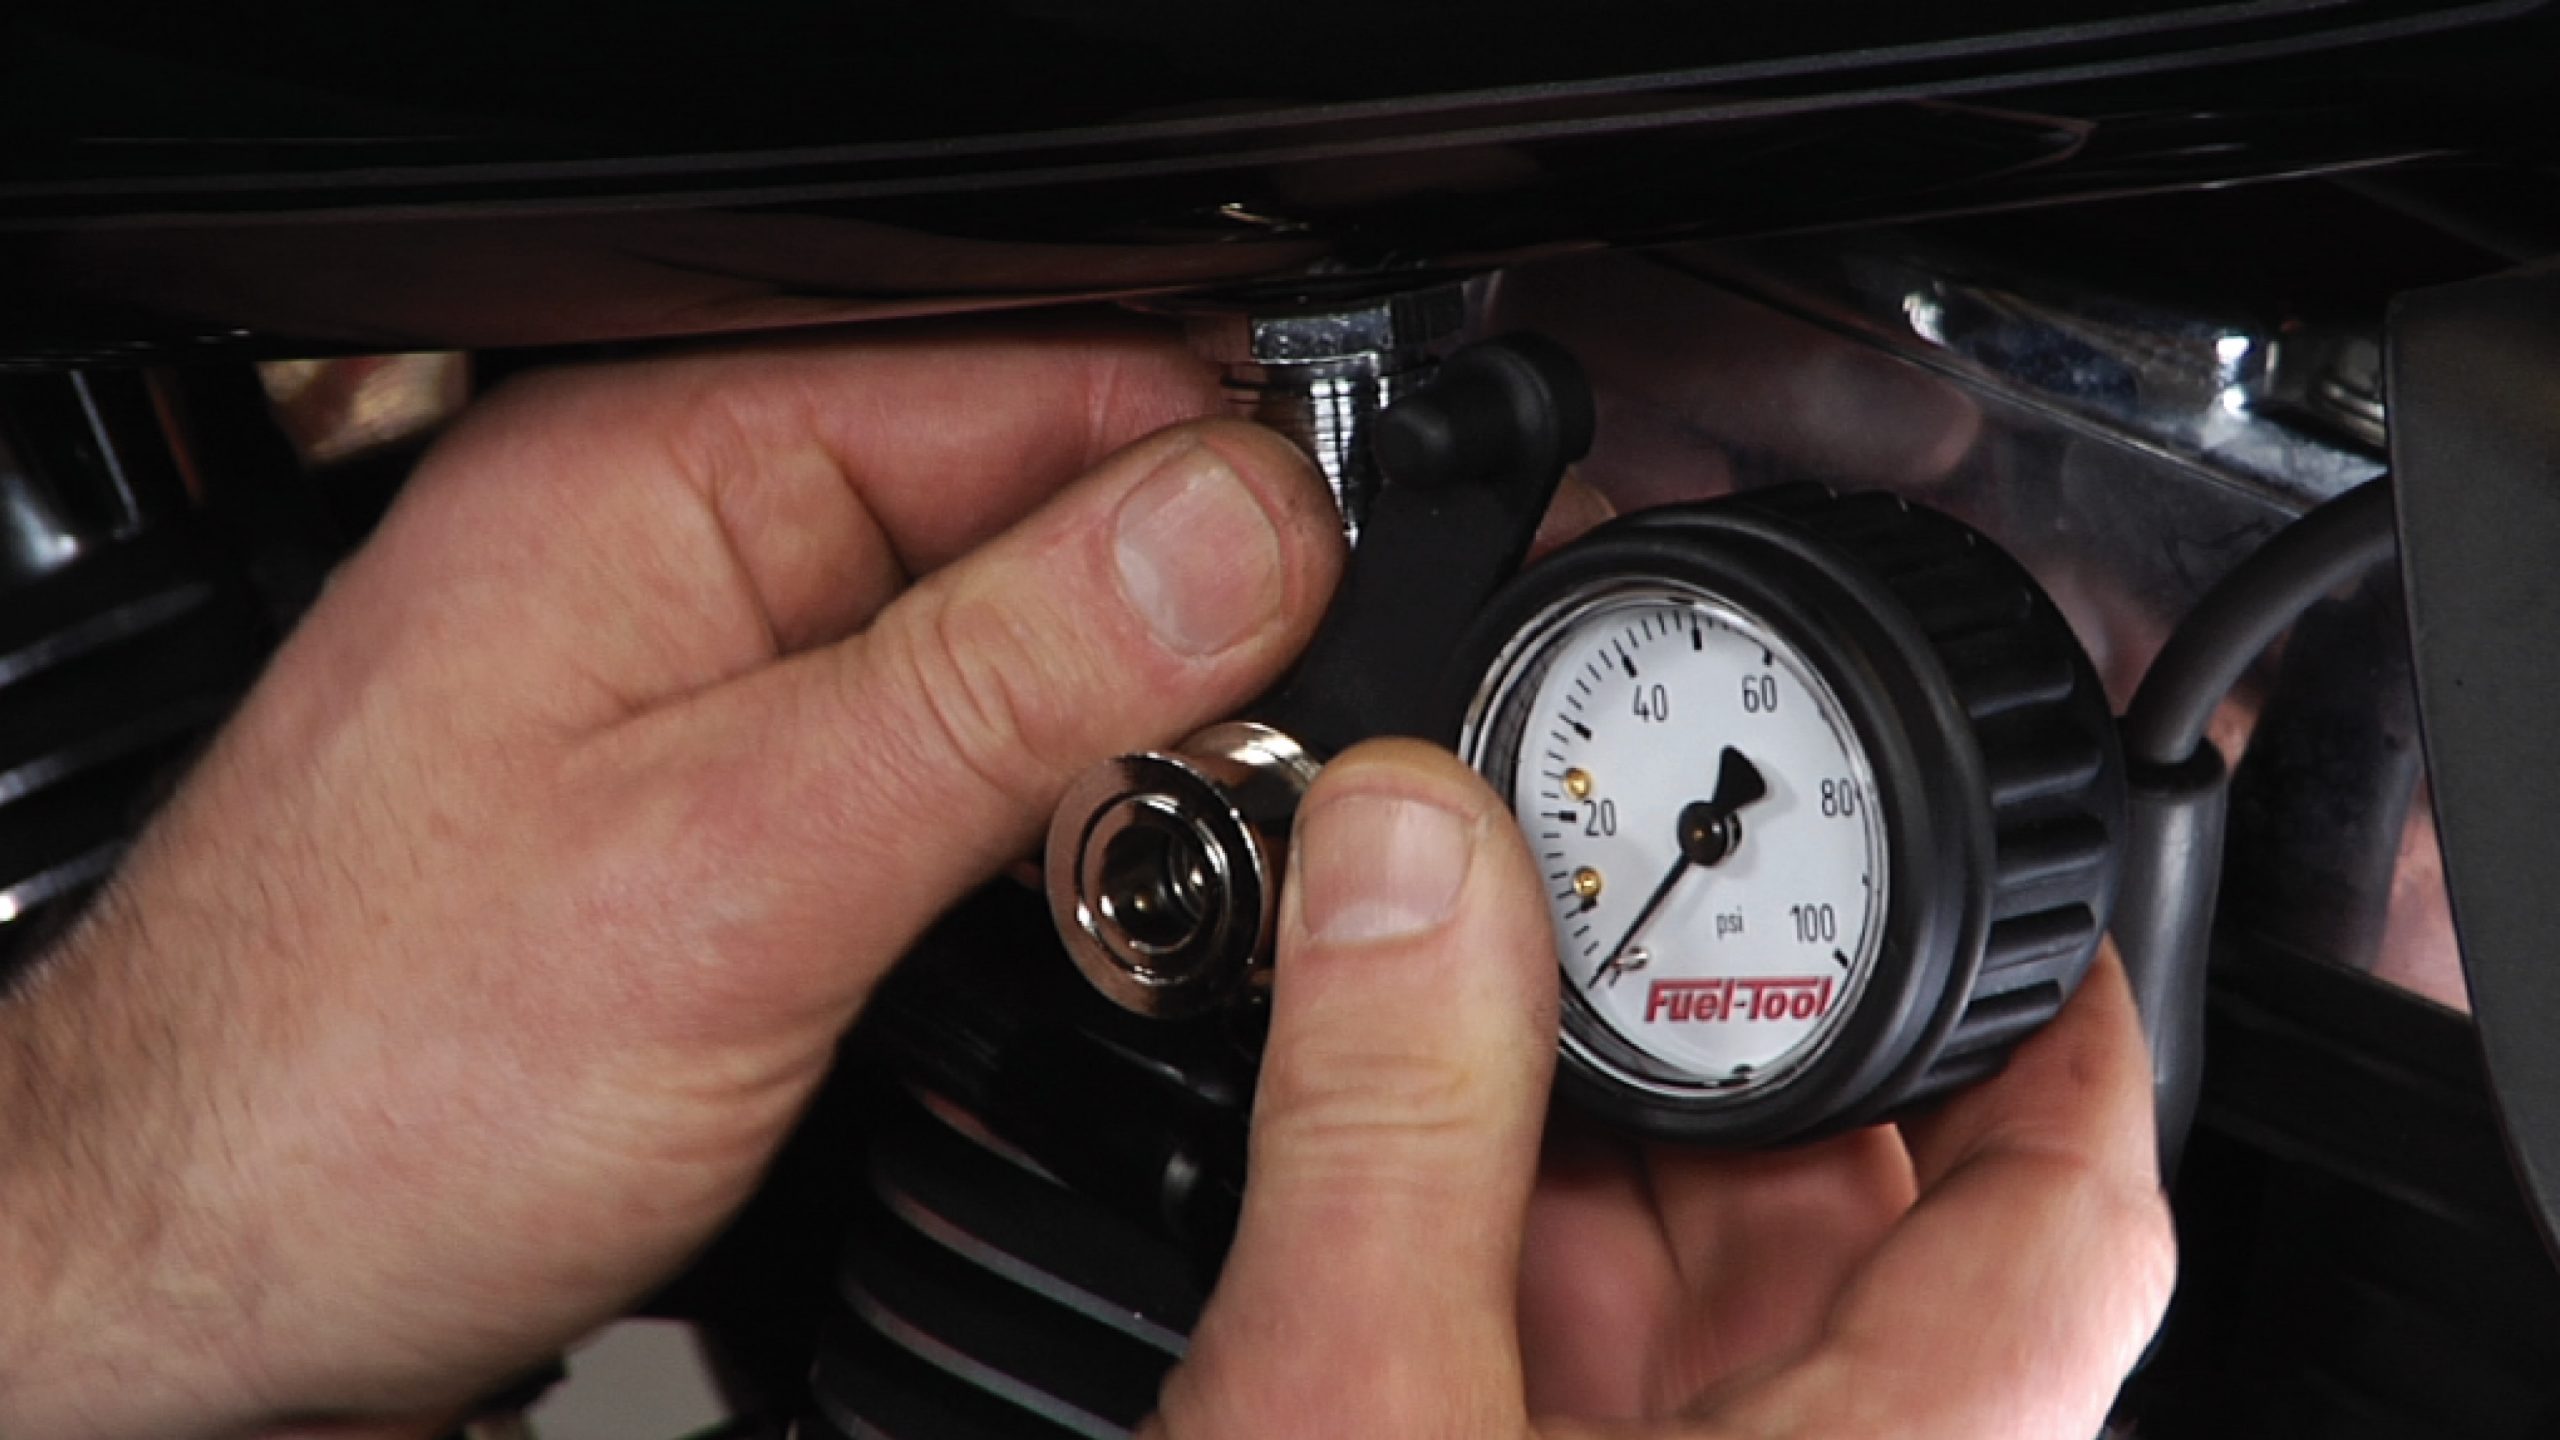 Tips for When Your Harley Won't Start - Fuel Pressure Issue